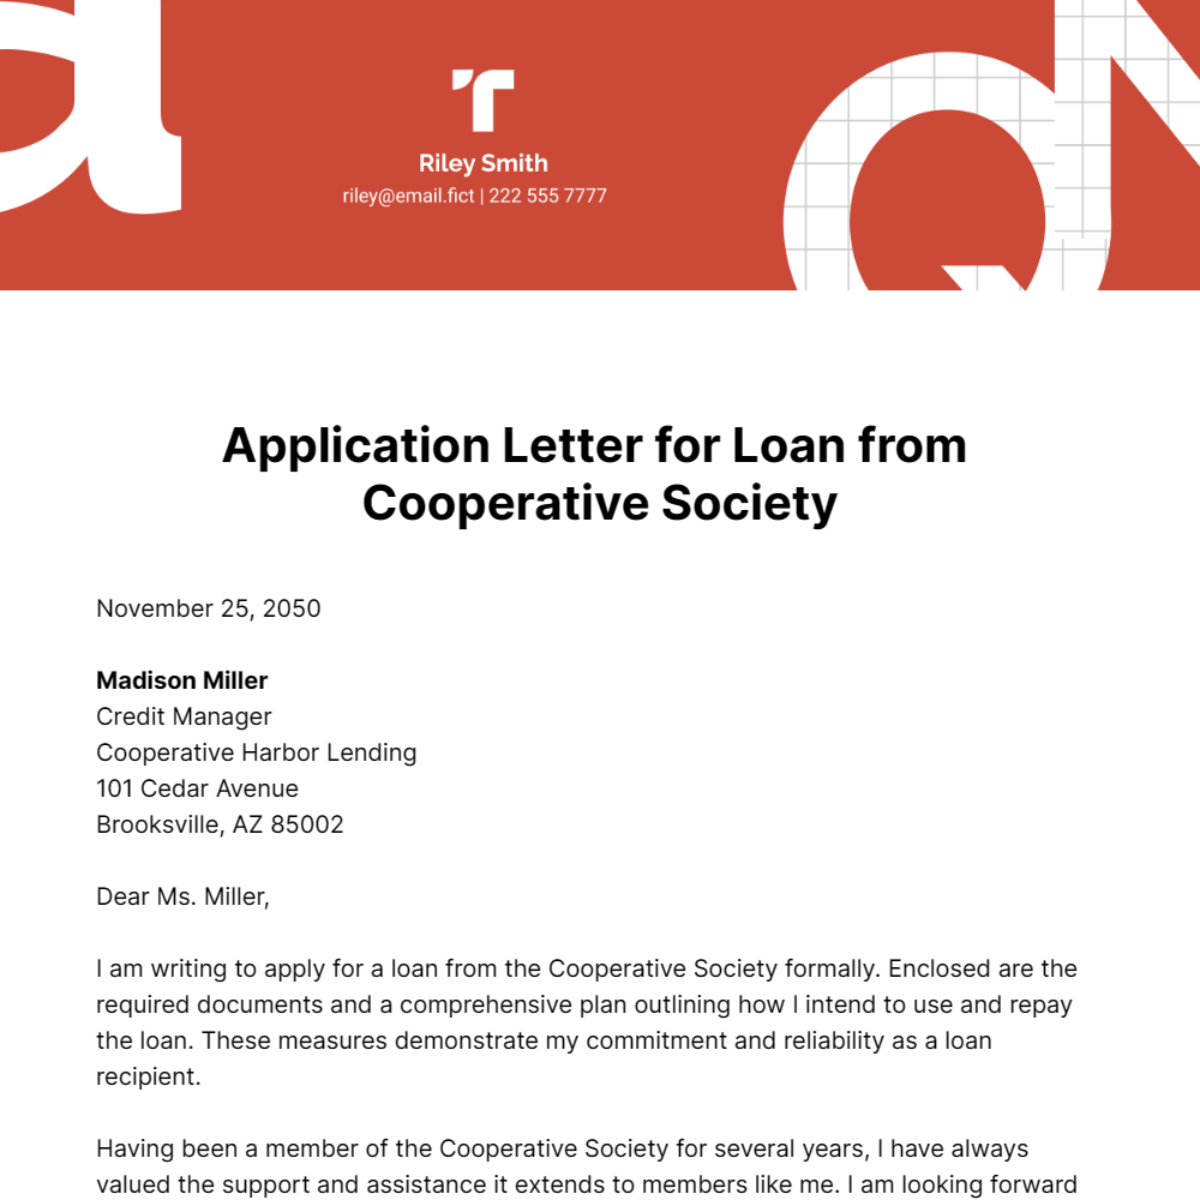 Application Letter for Loan from Cooperative Society Template